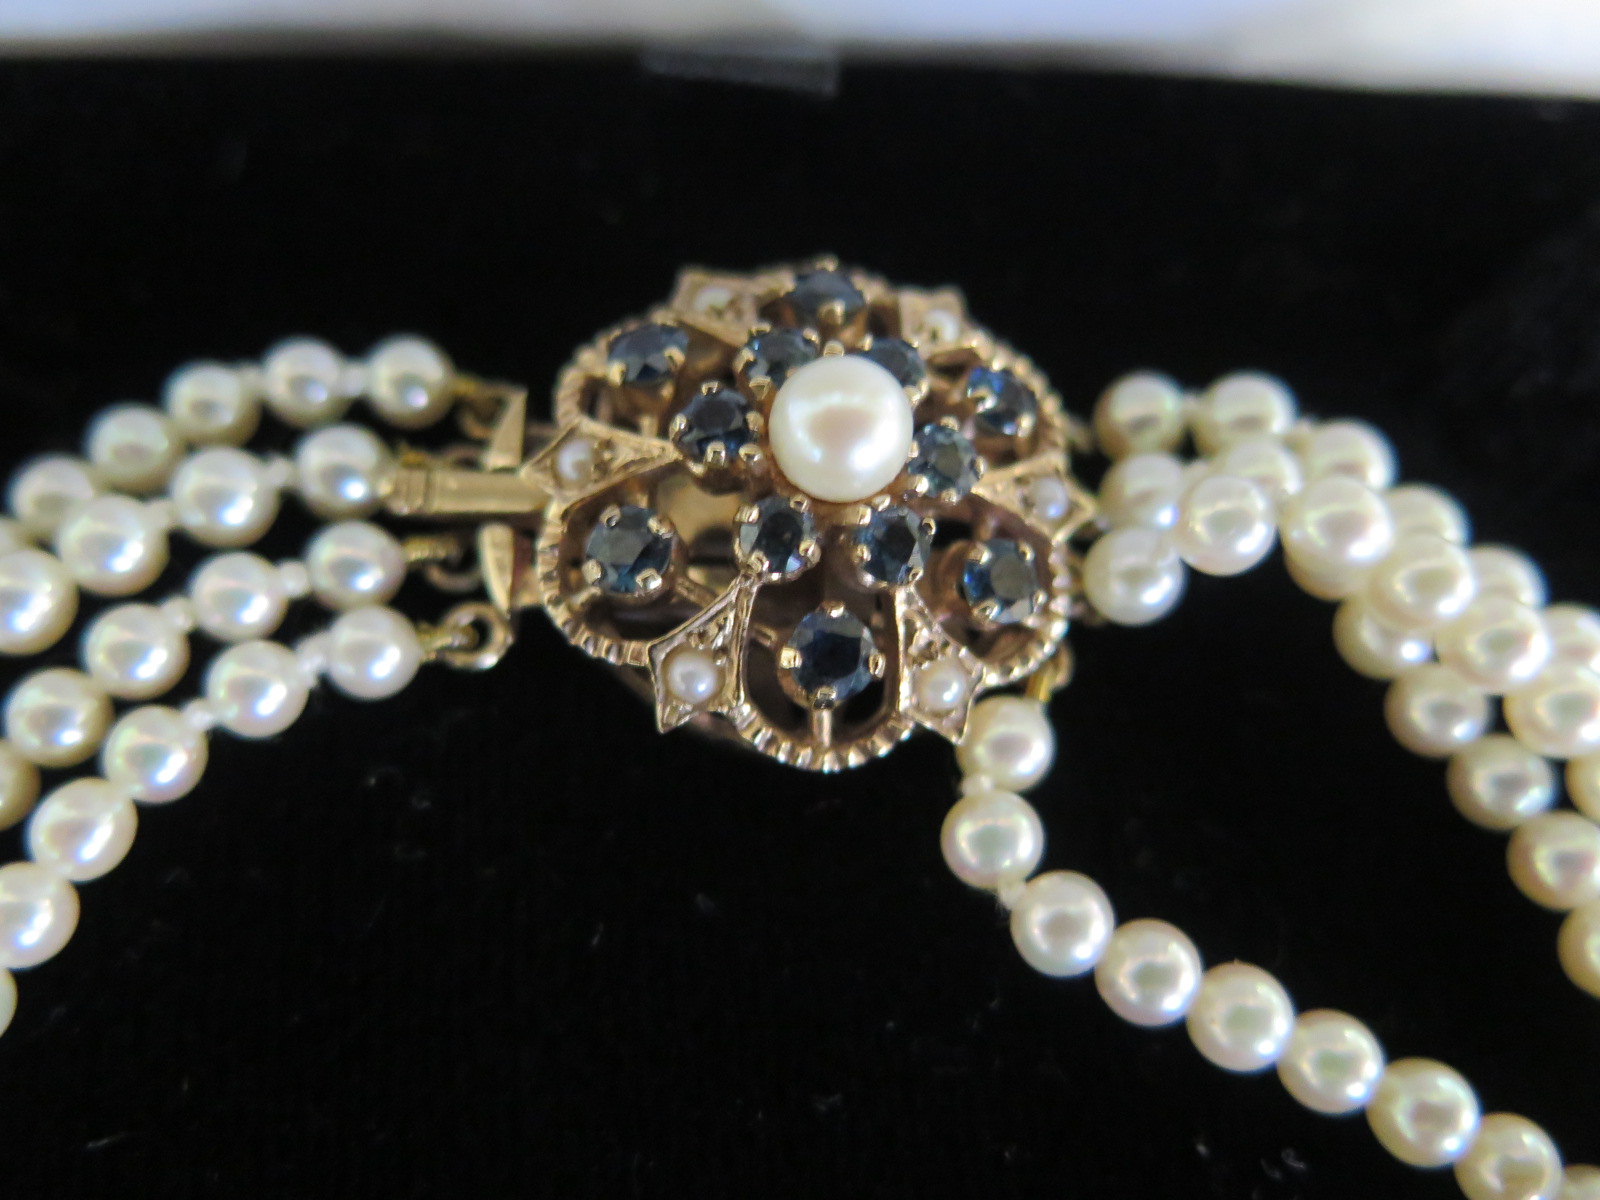 A four string pearl choker with 9ct gold clasp - 34cm long - in good condition - pearls - Image 2 of 2